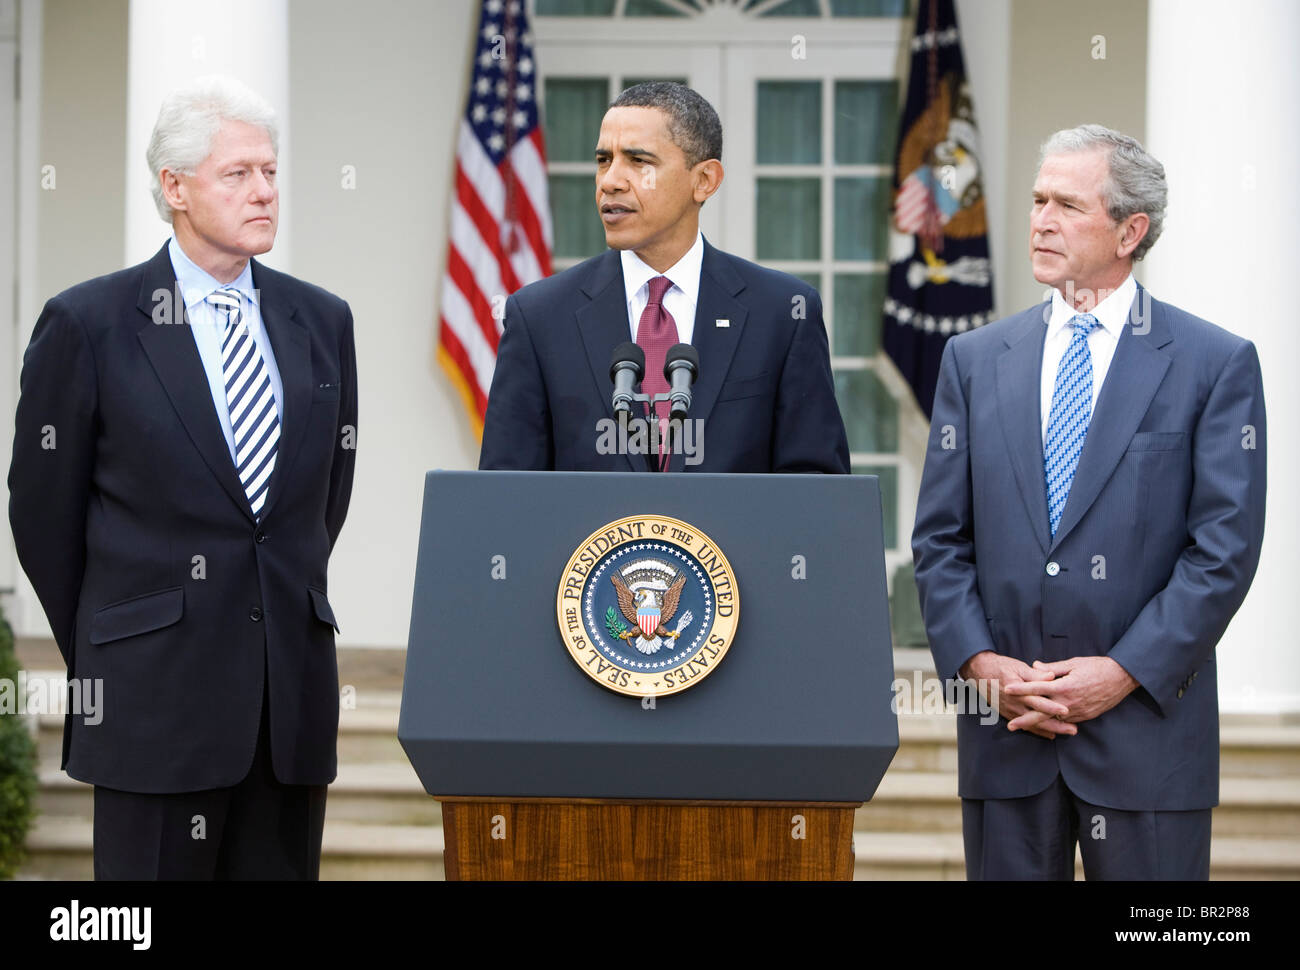 President Barack Obama with former Presidents George W. Bush and Bill Clinton.  Stock Photo